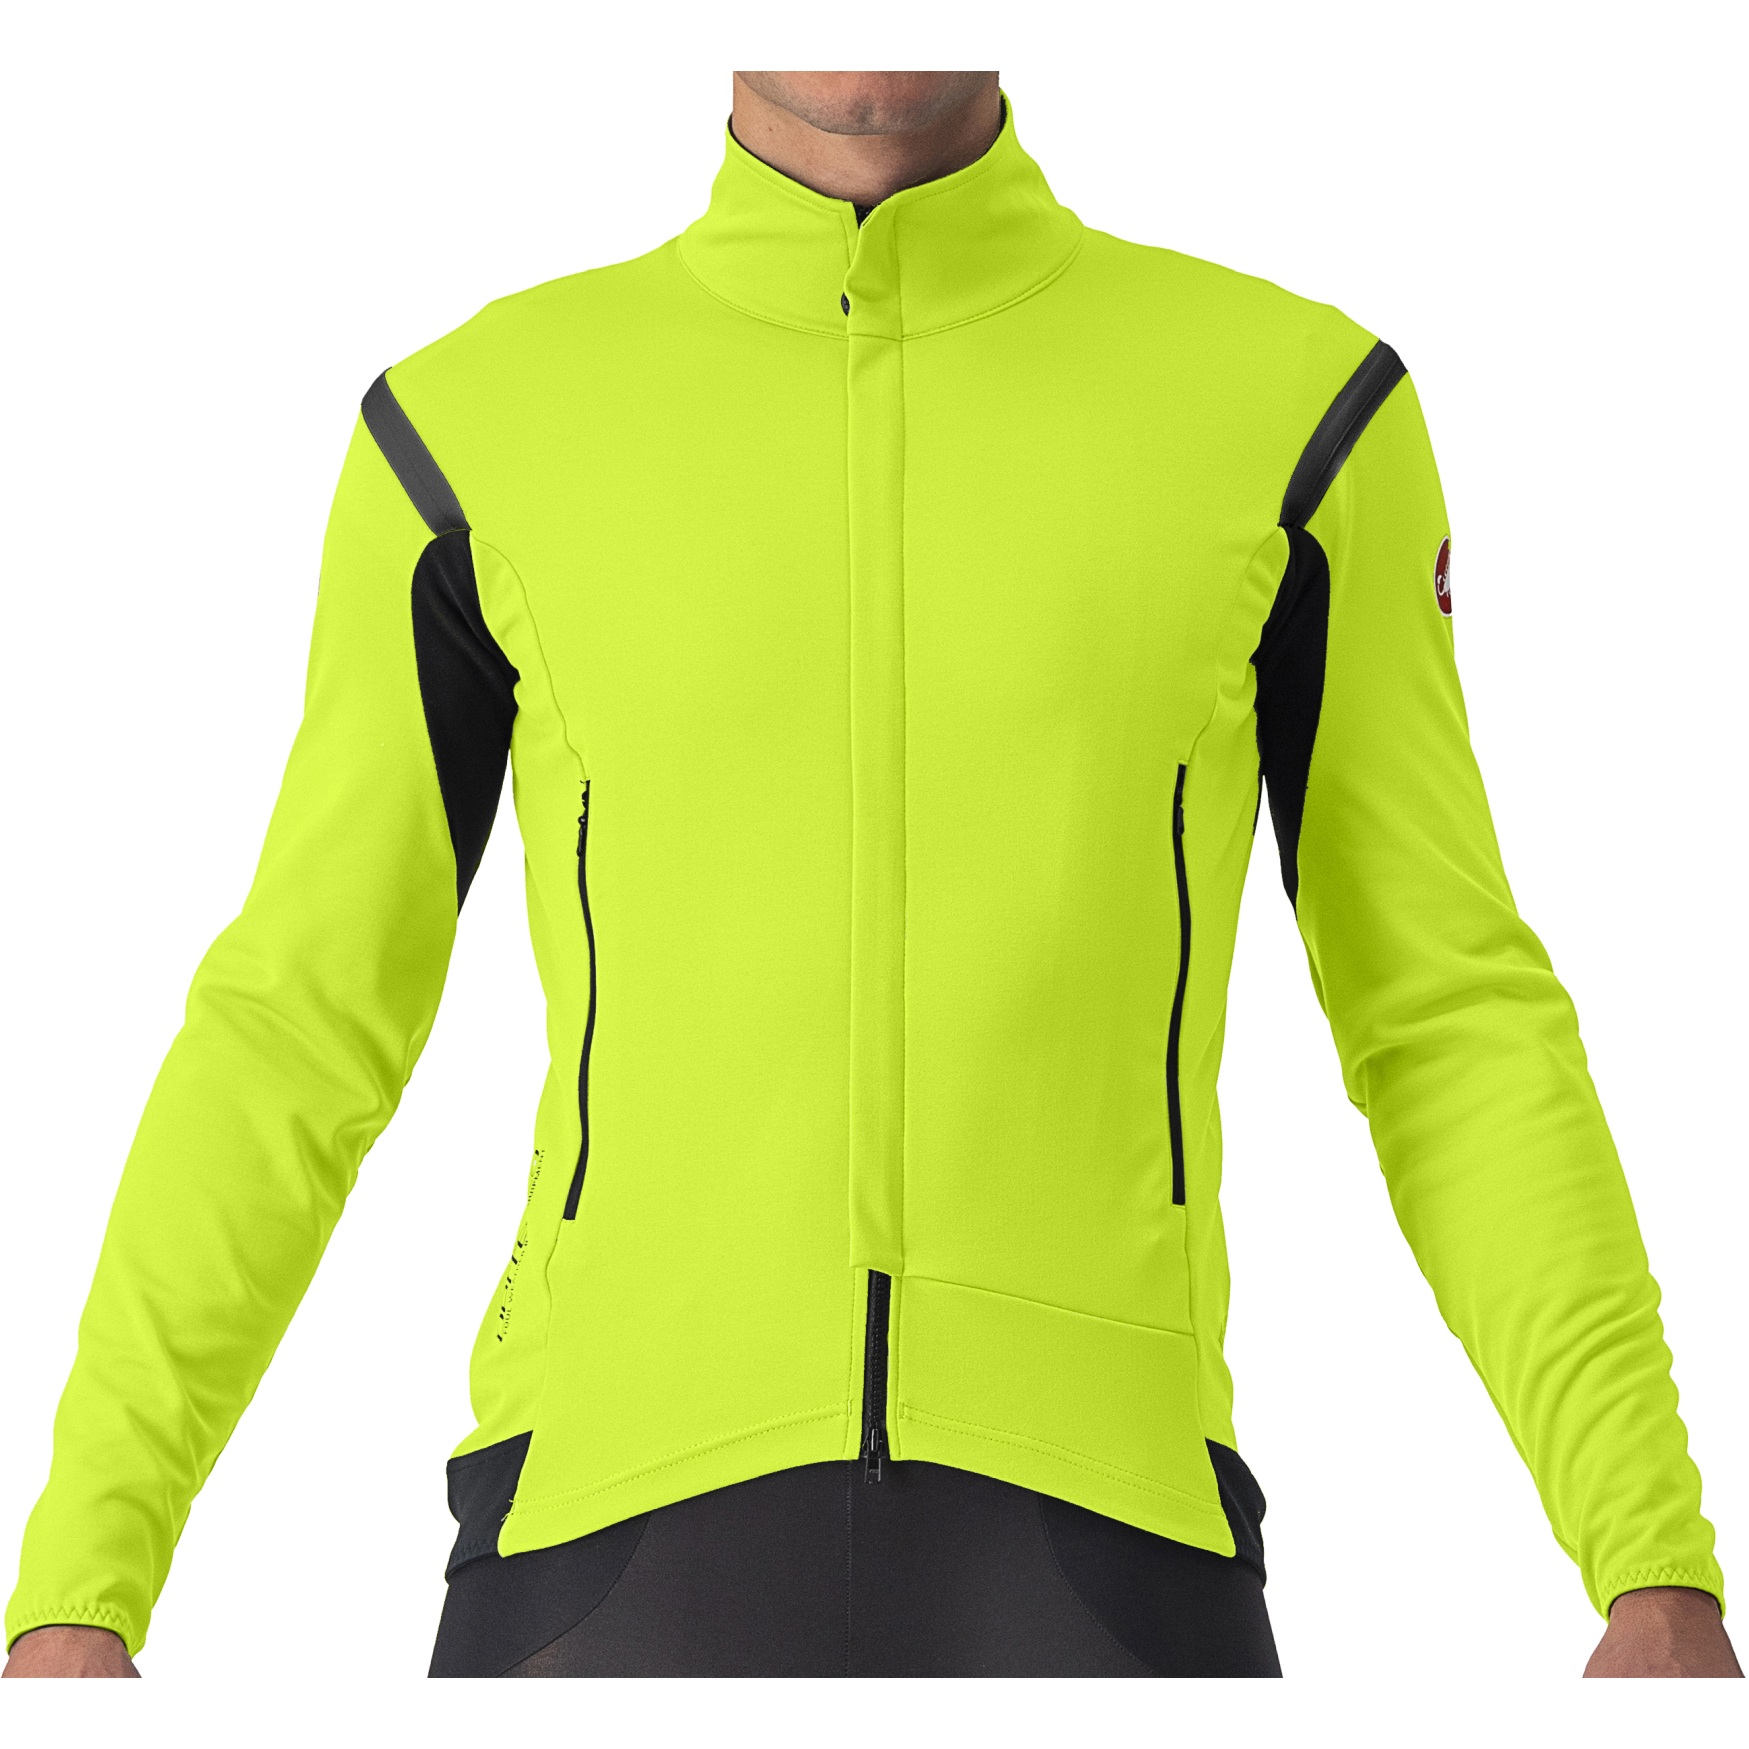 Picture of Castelli Perfetto RoS 2 Jacket - electric lime/dark grey 383